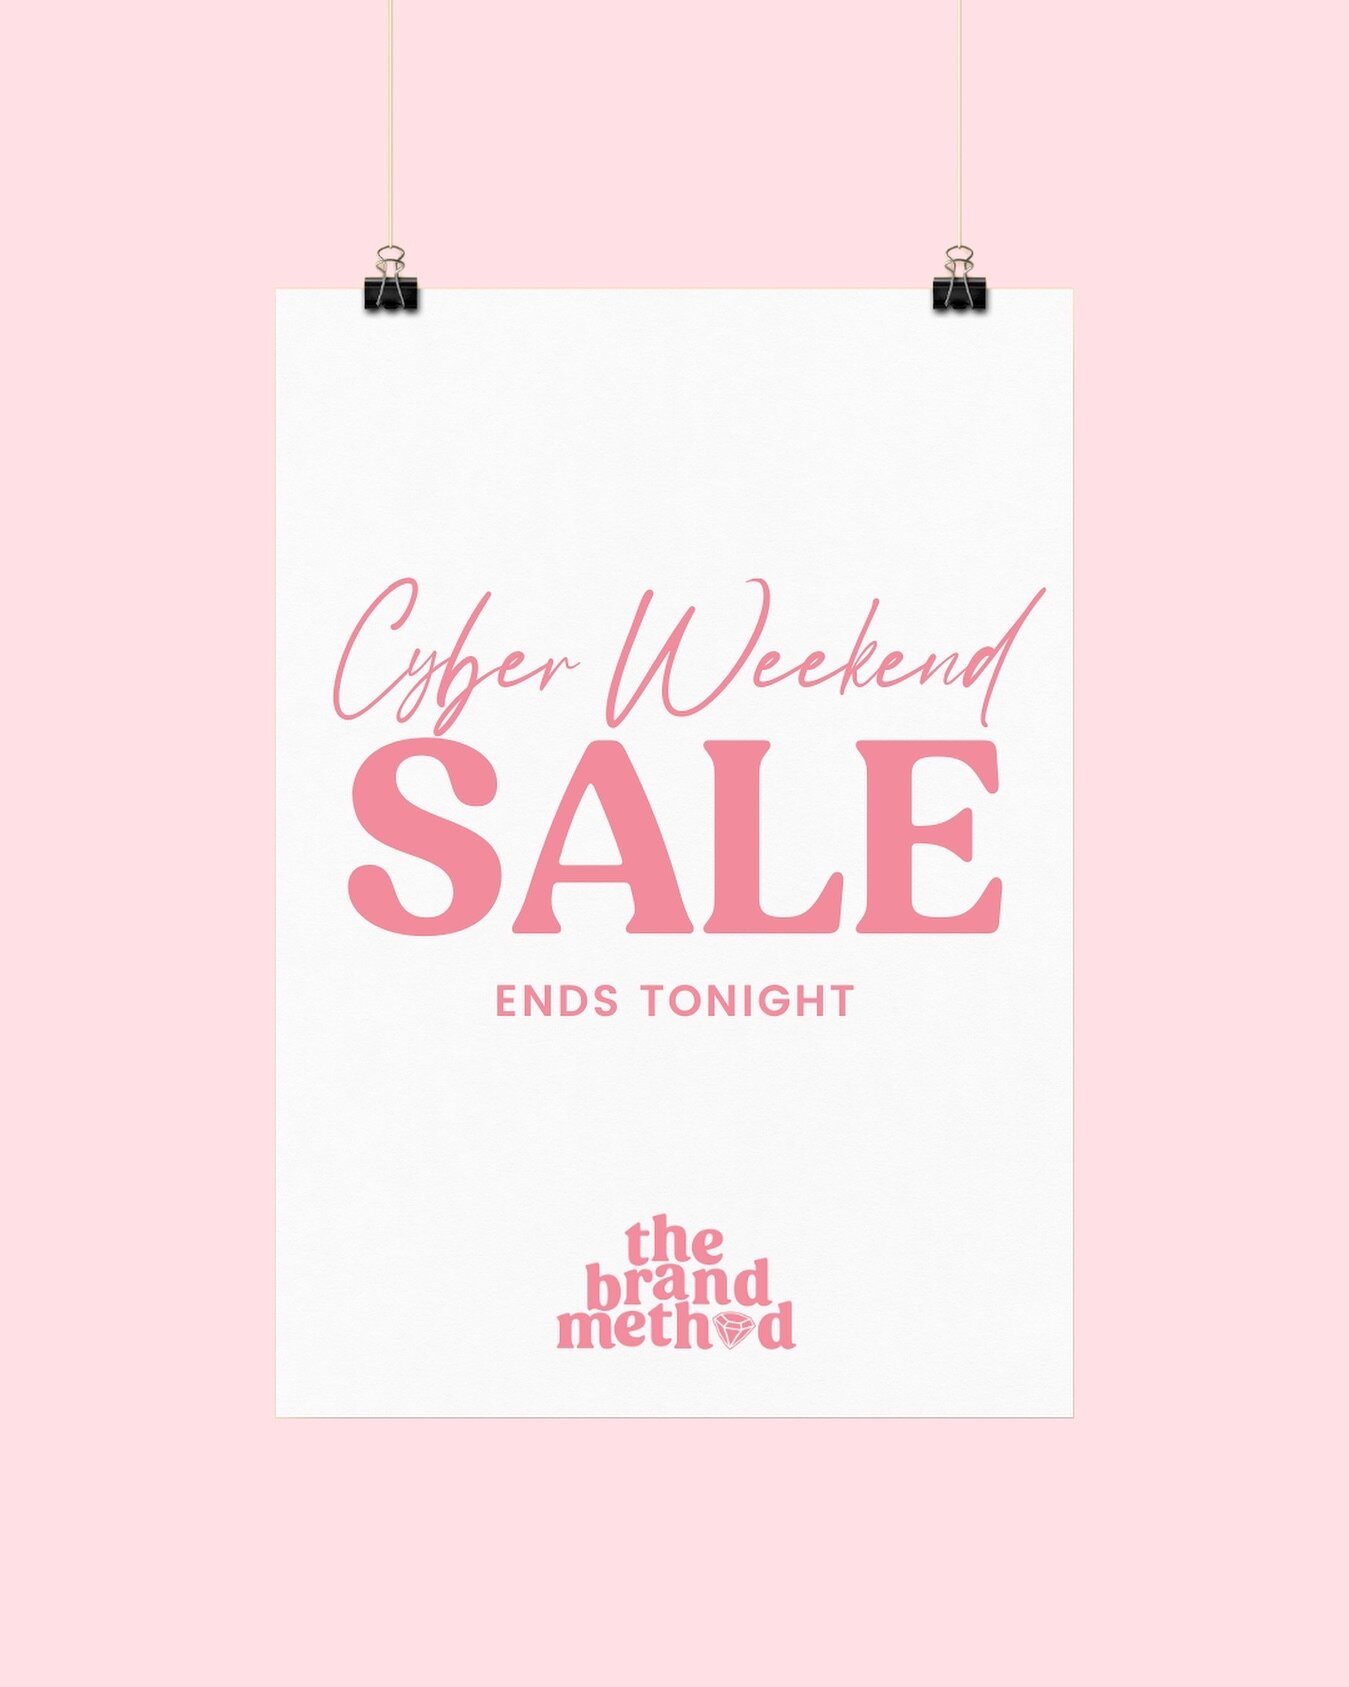 ​🌟 SALON OWNERS 🌟
As the clock ticks down on our Black Friday Salon Marketing Tools &amp; Templates Sale, we wanted to send a reminder to your inbox. OUR SALE ENDS AT MIDNIGHT!
You have mere hours left to seize our exclusive offers!!!
​
​This is yo